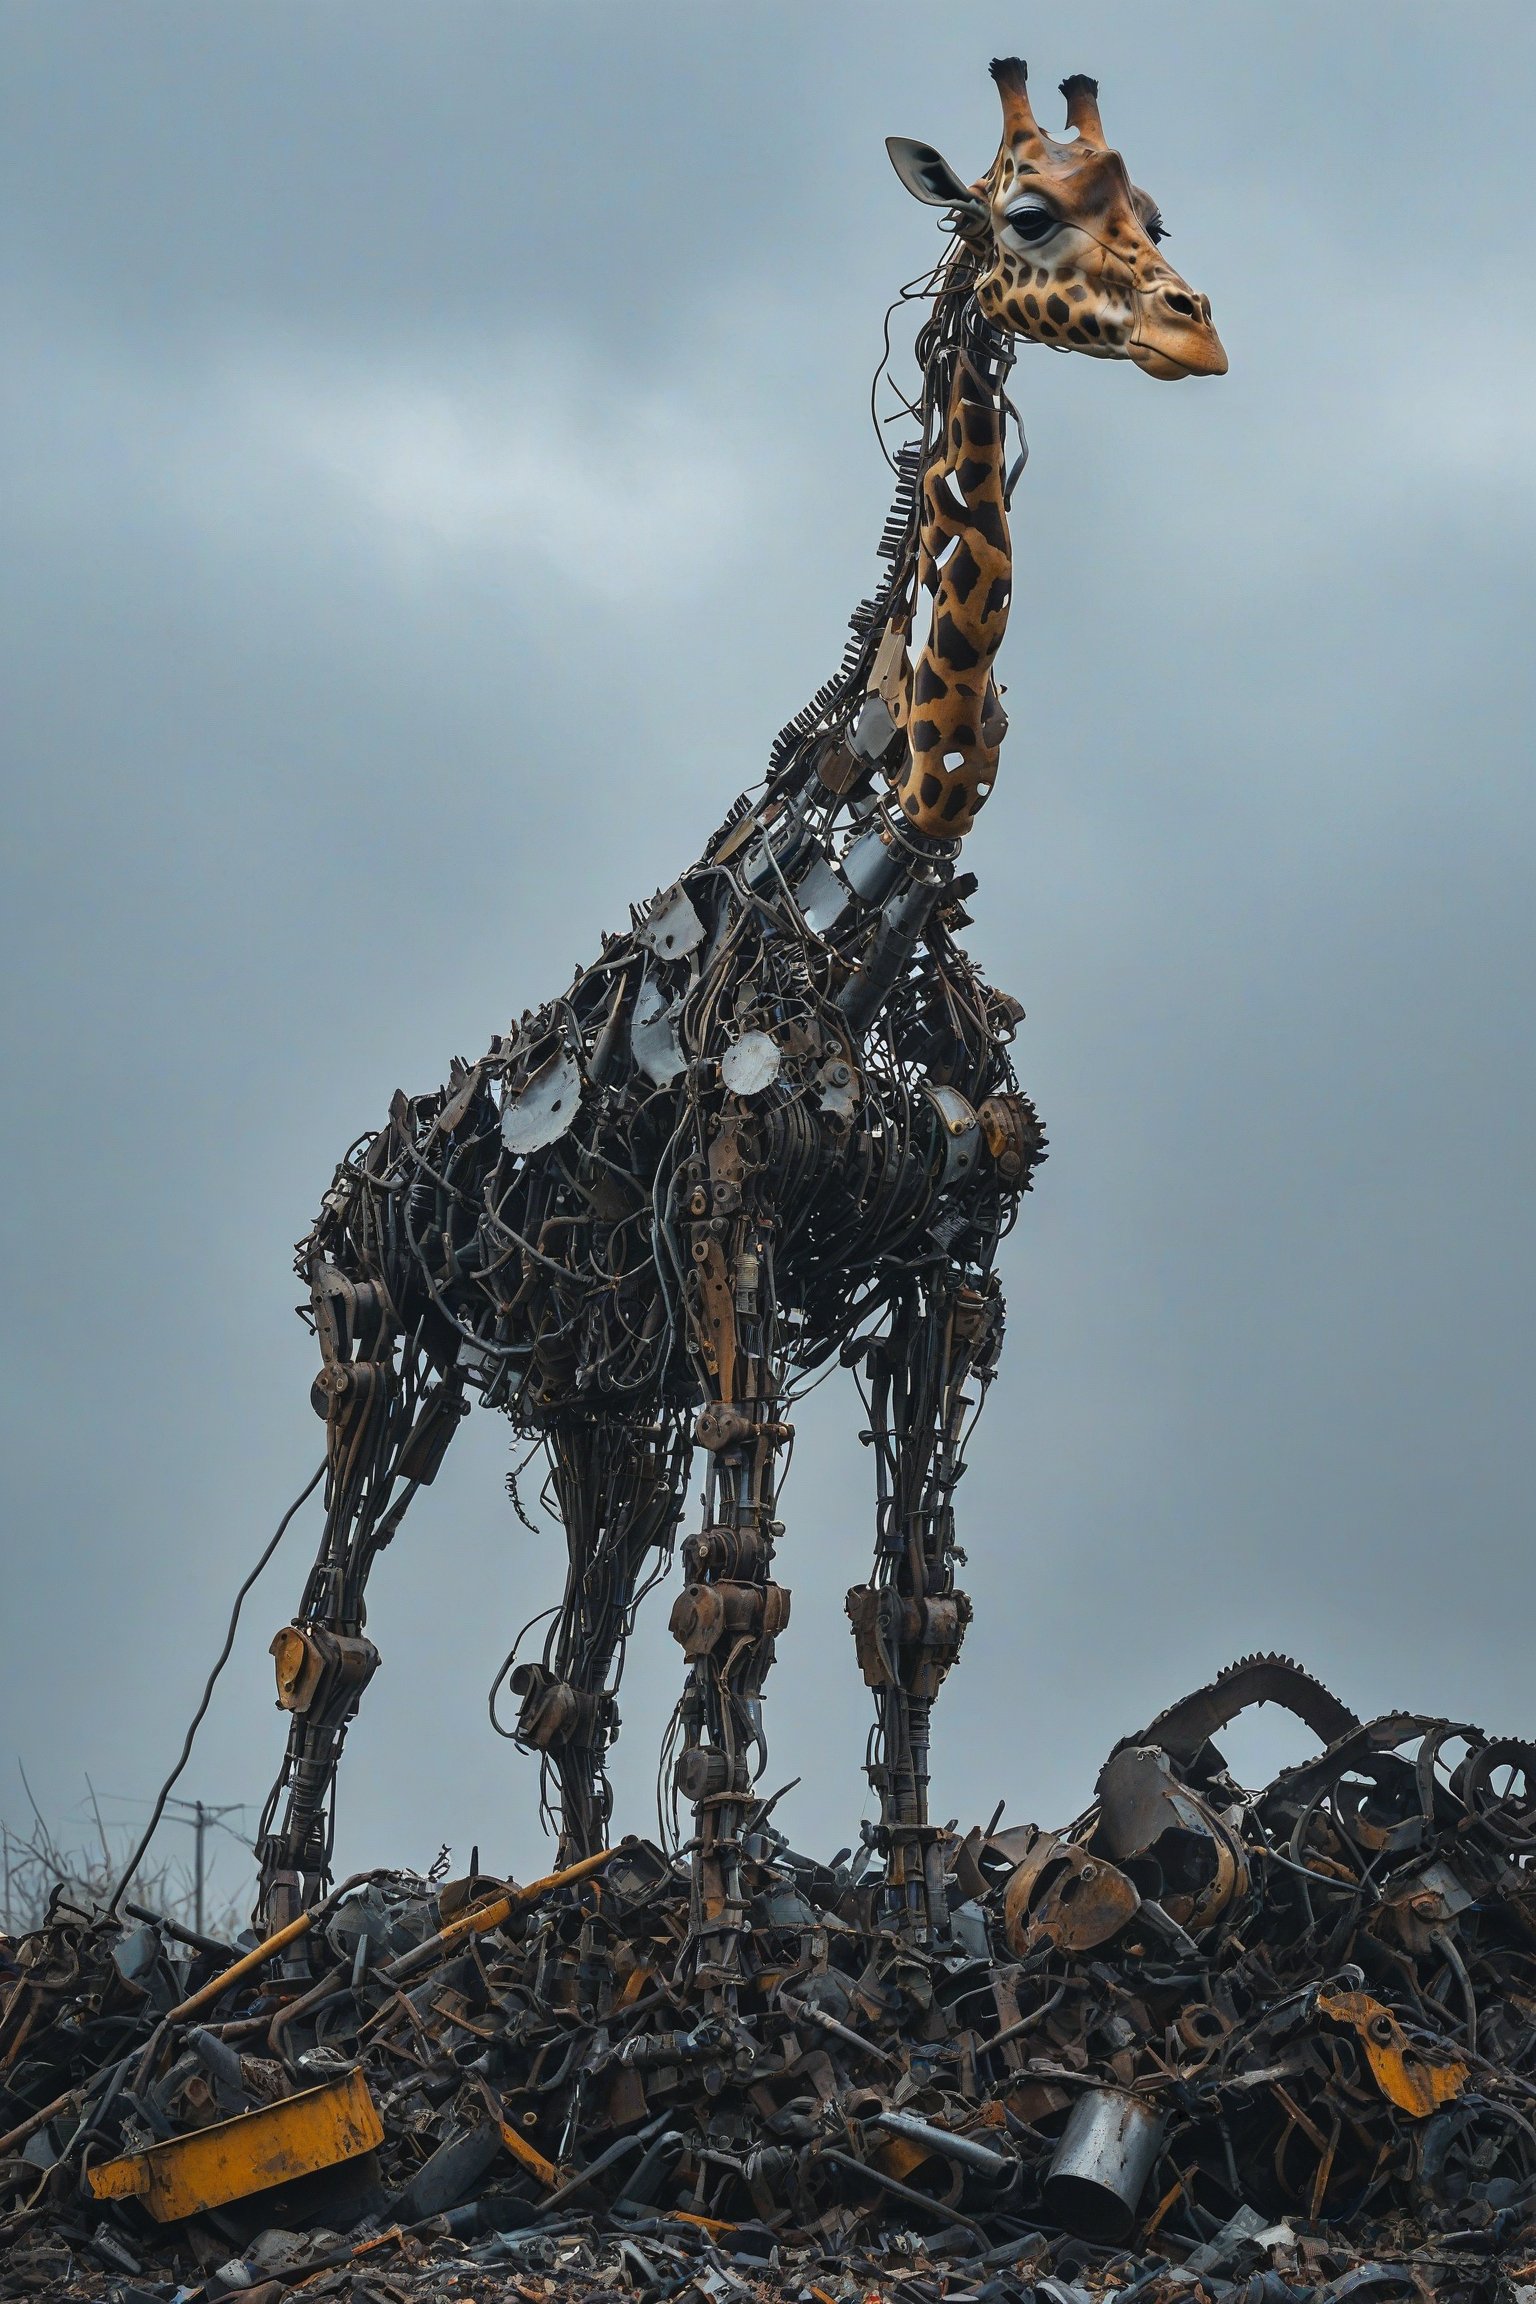 A towering, intricately constructed mechanical giraffe standing atop a mound of discarded metal and debris. The giraffe appears to be made of various metal parts, wires, and tools, giving it a skeletal and mechanical appearance. The background is overcast, adding a somber and post-apocalyptic feel to the scene.